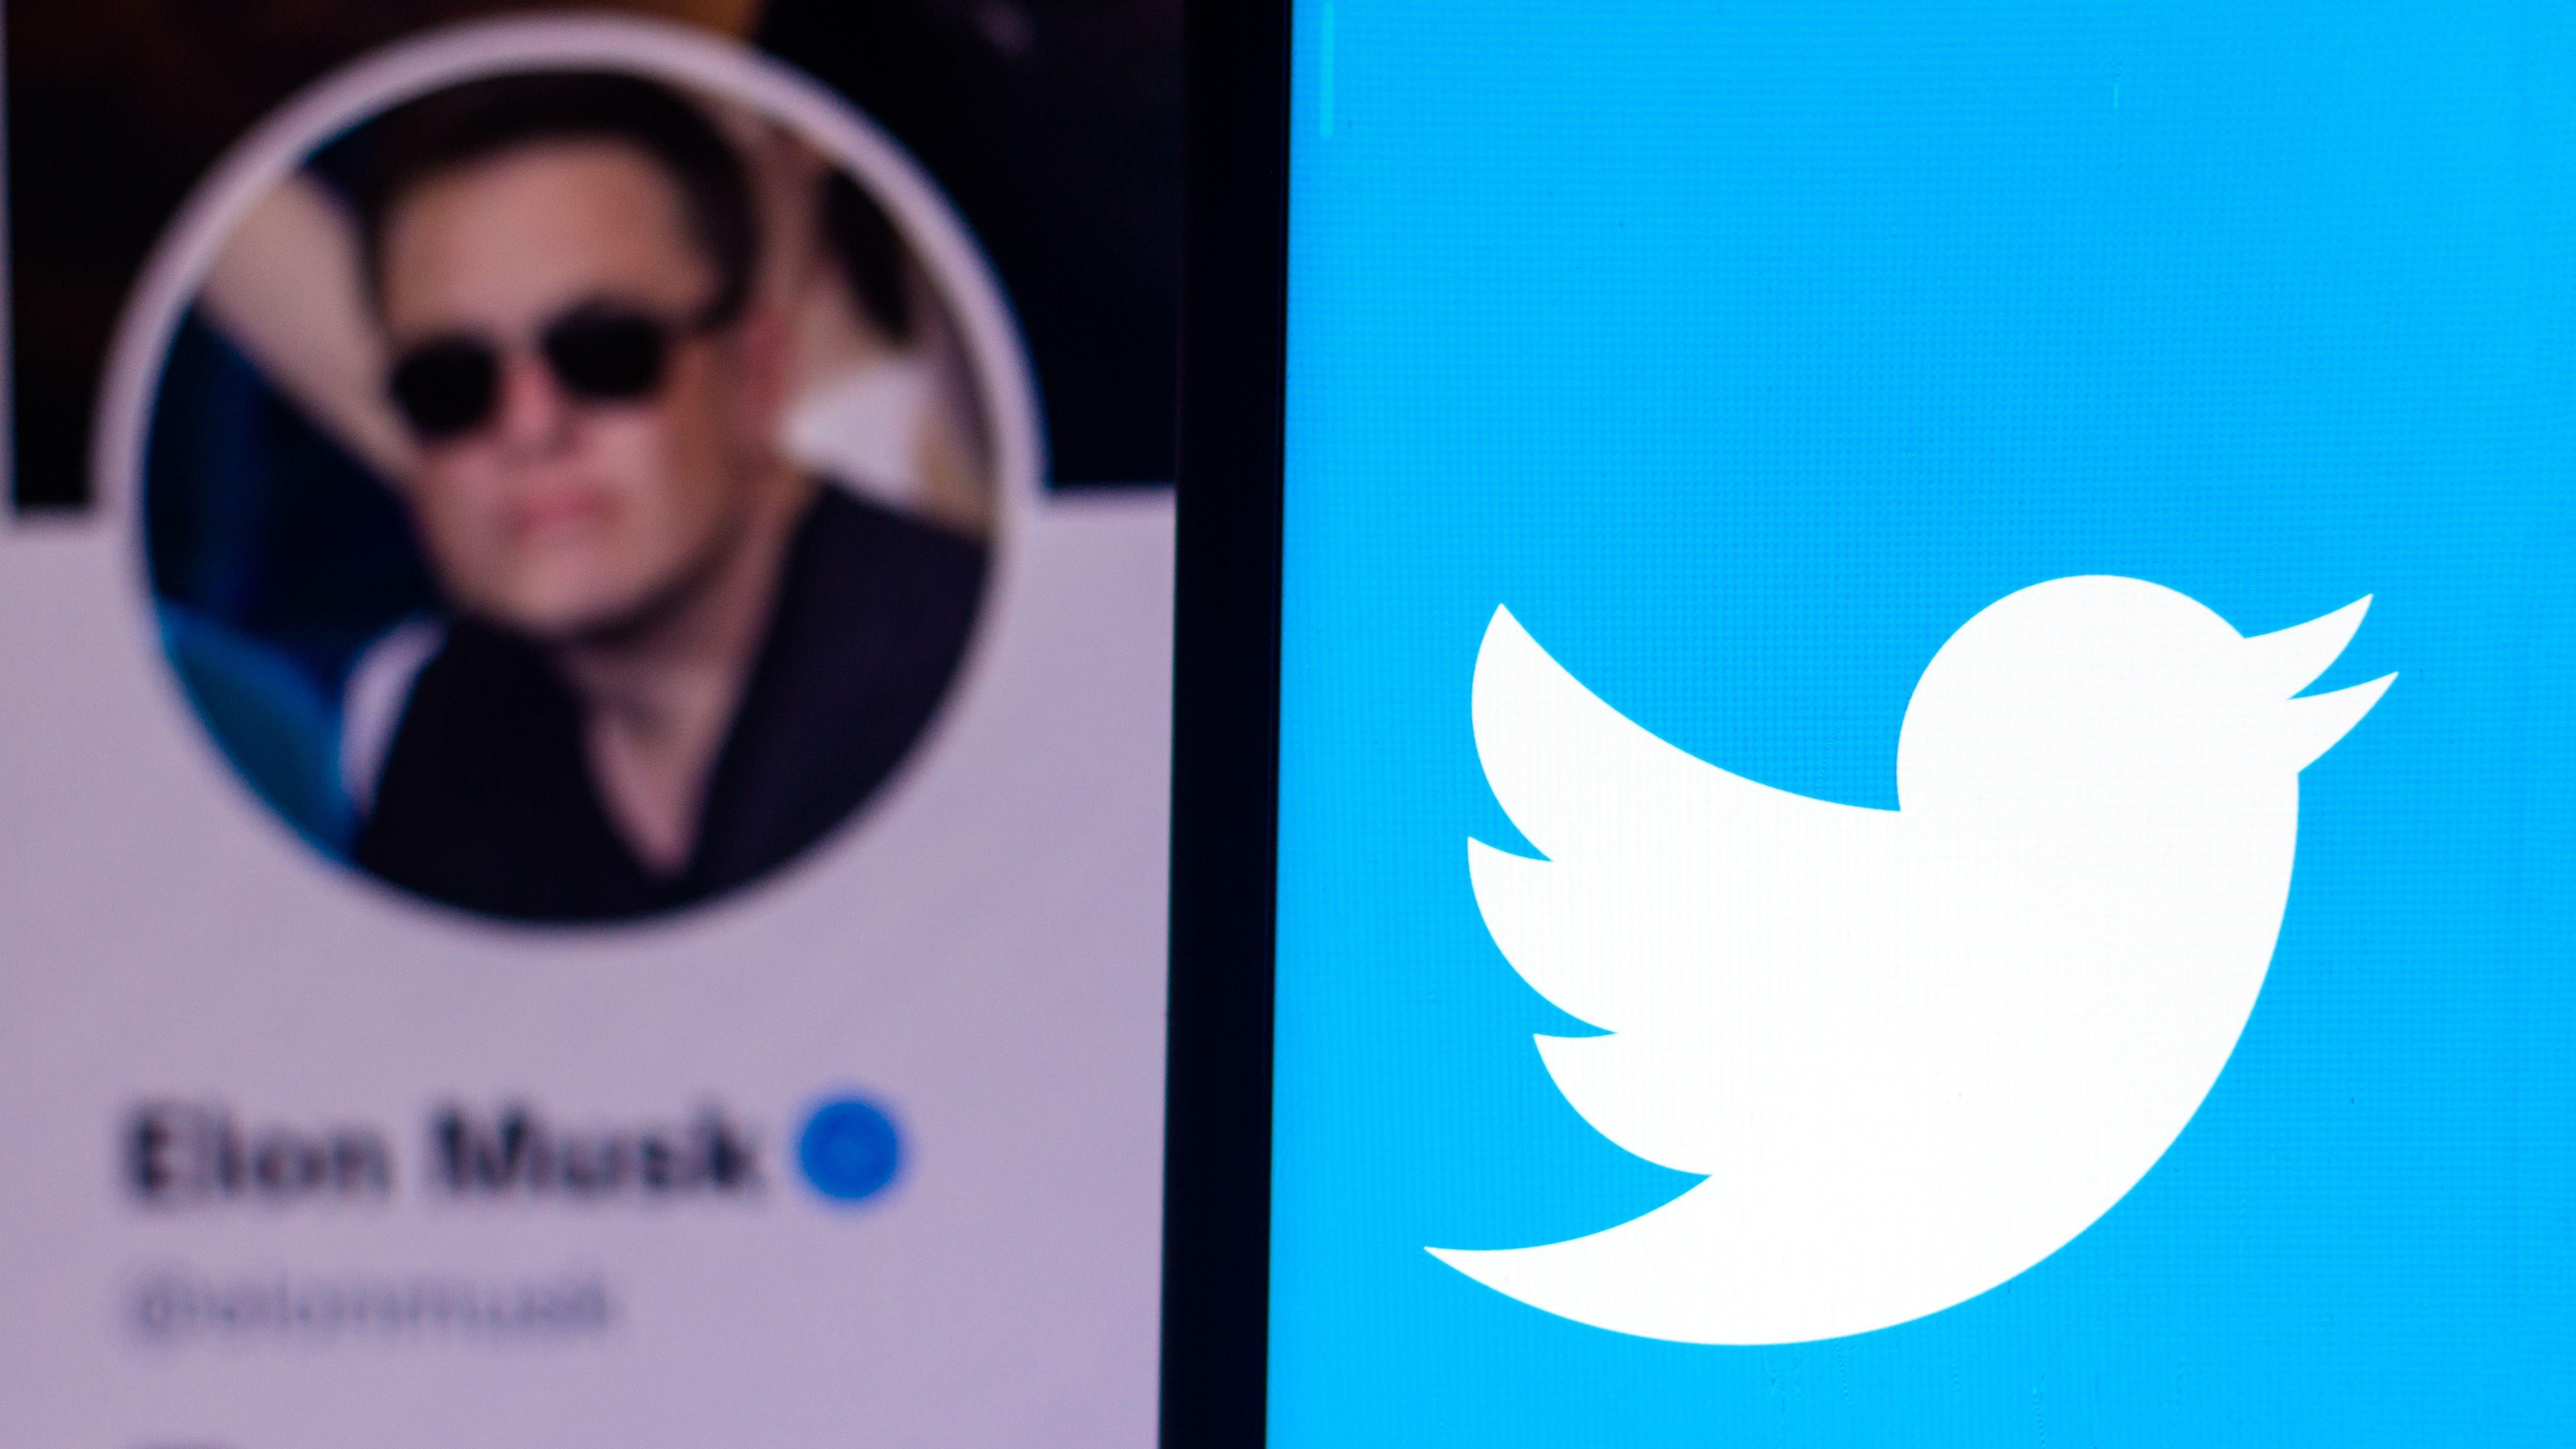 Elon Musk's Twitter profile picture next to the logo of Twitter